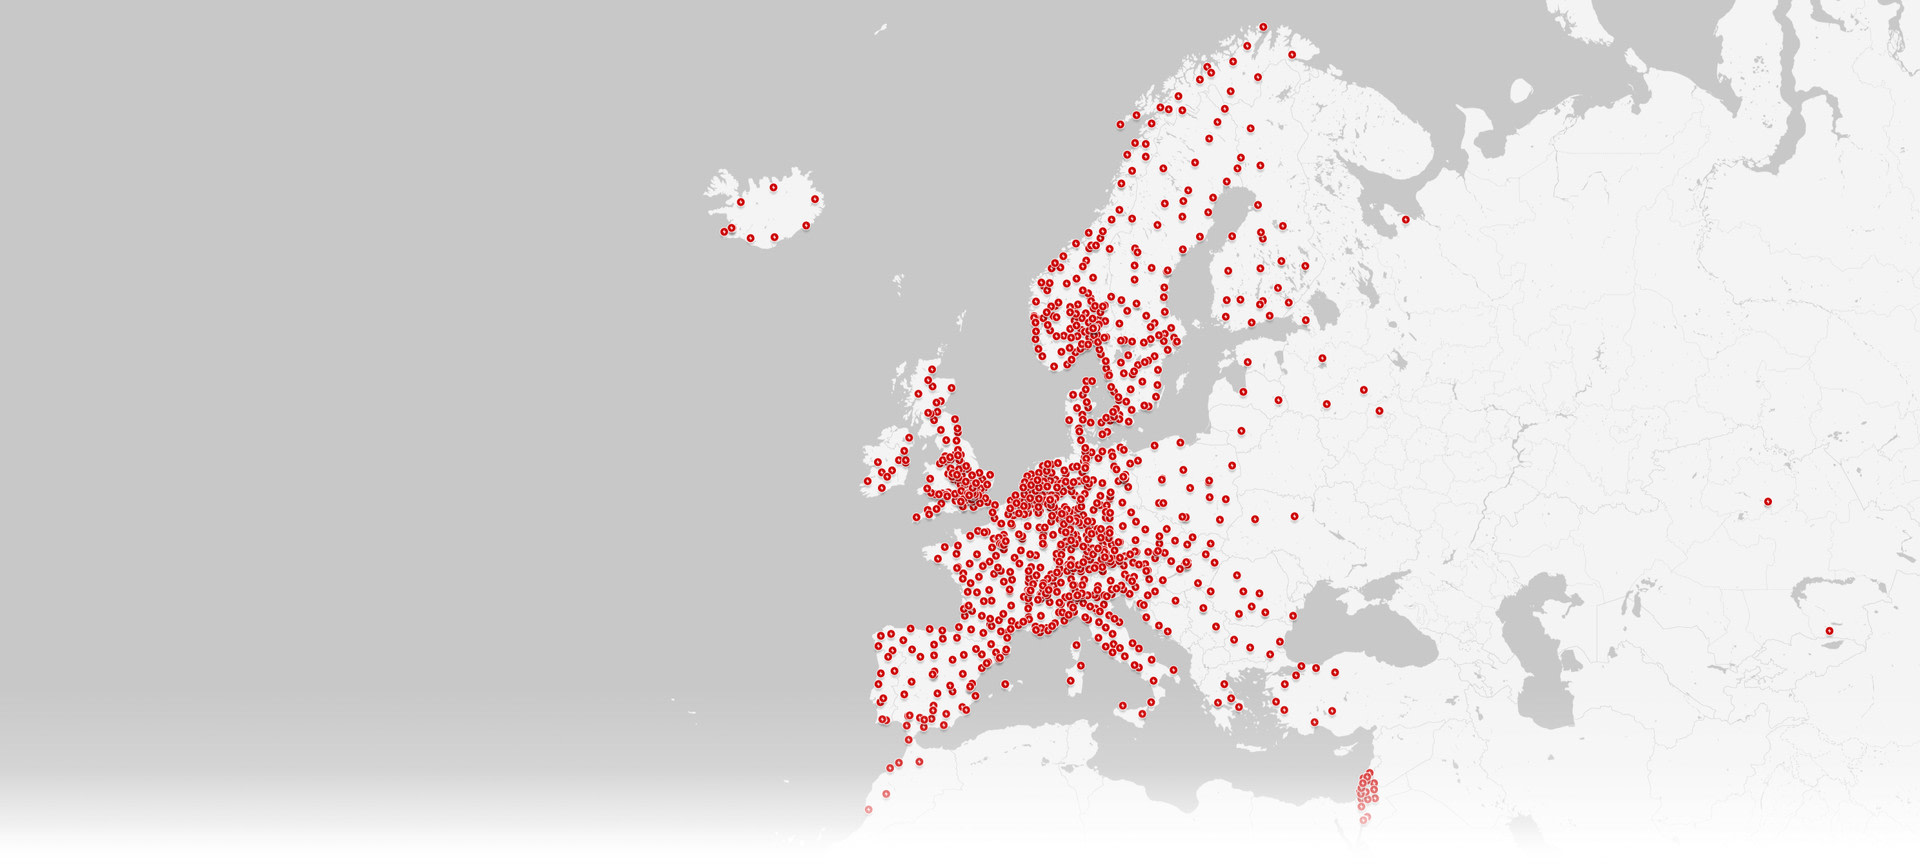 Map of Superchargers in Europe and Middle East